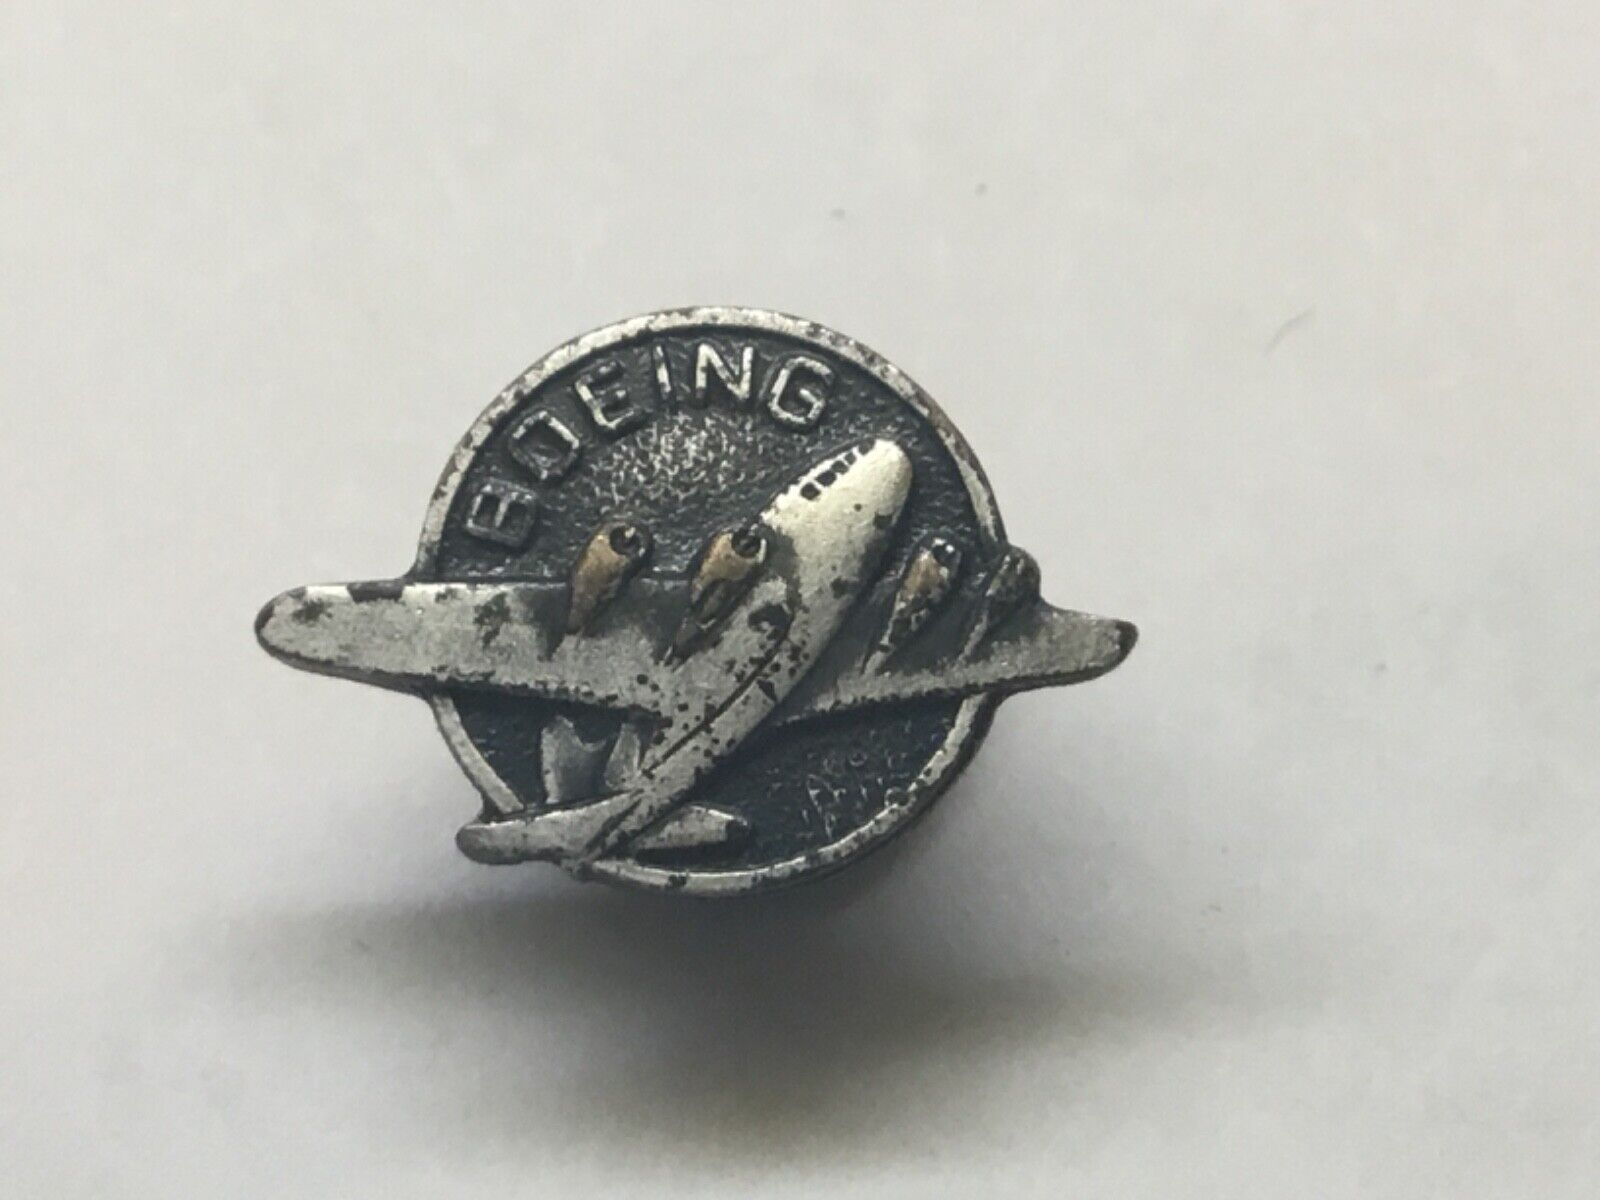 Vintage Boeing Company Silver Lapel Pin Screw back Unmarked Aviation Aerospace 